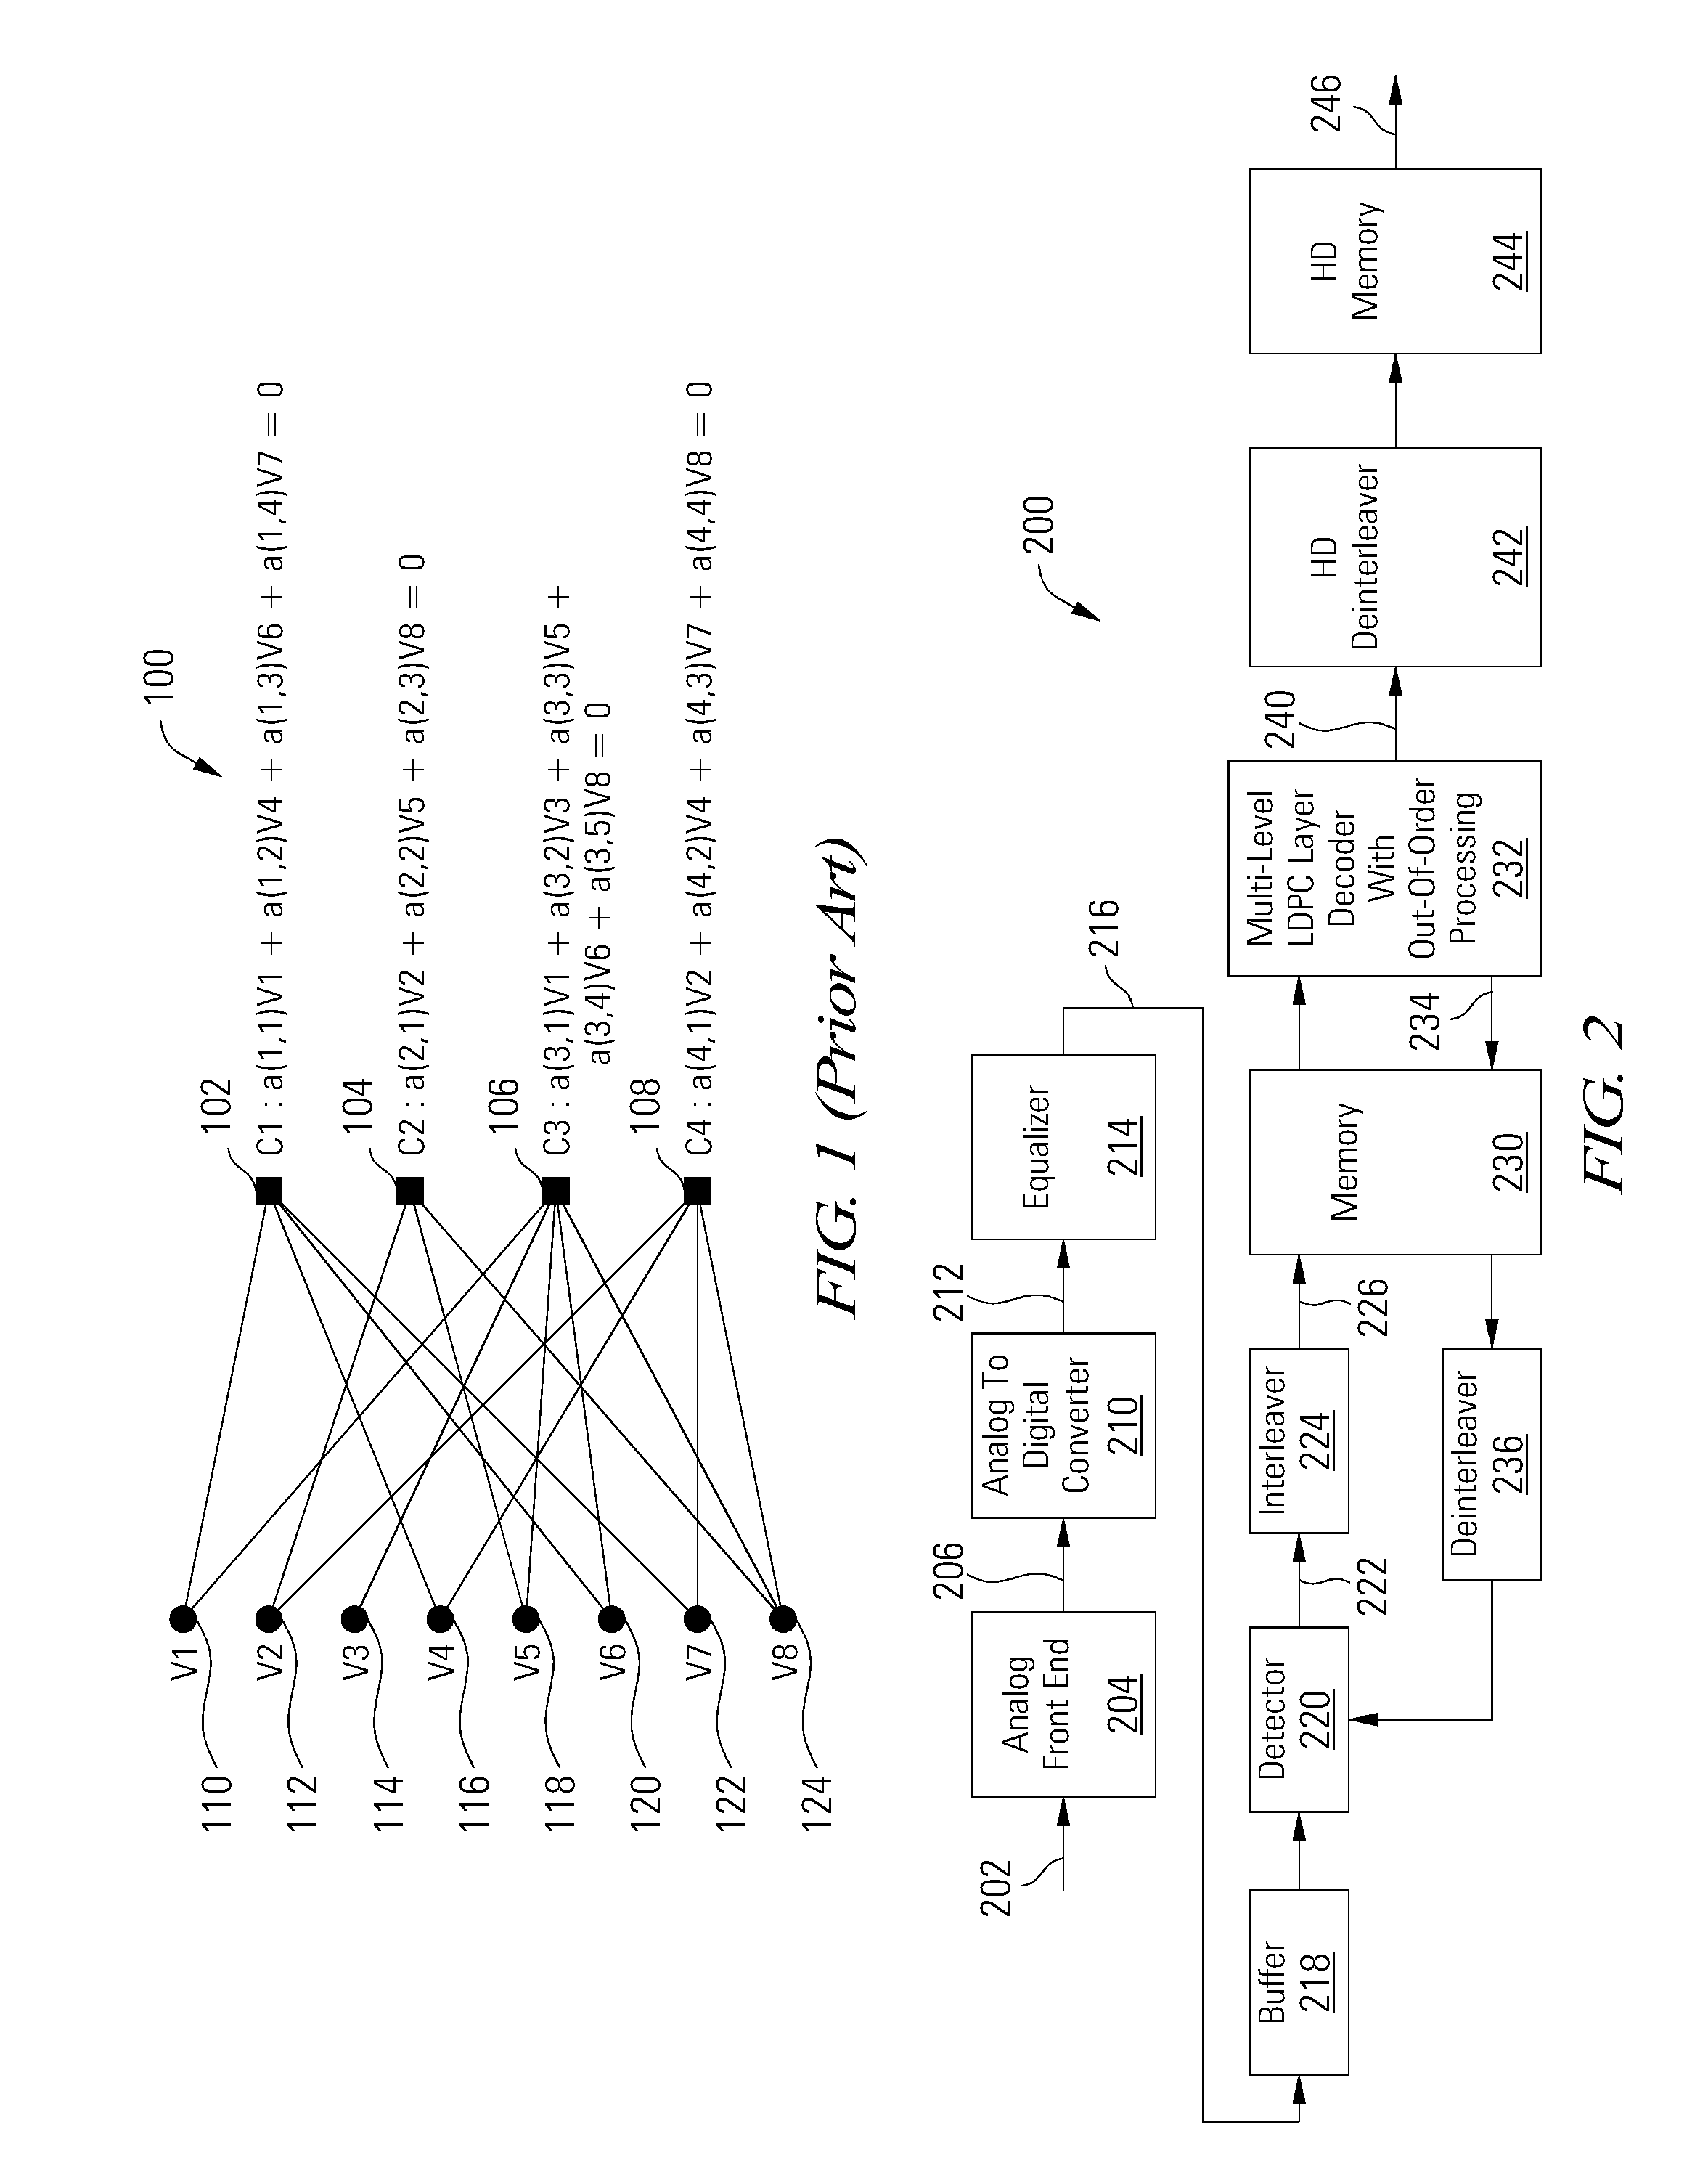 Multi-Level LDPC Layered Decoder With Out-Of-Order Processing